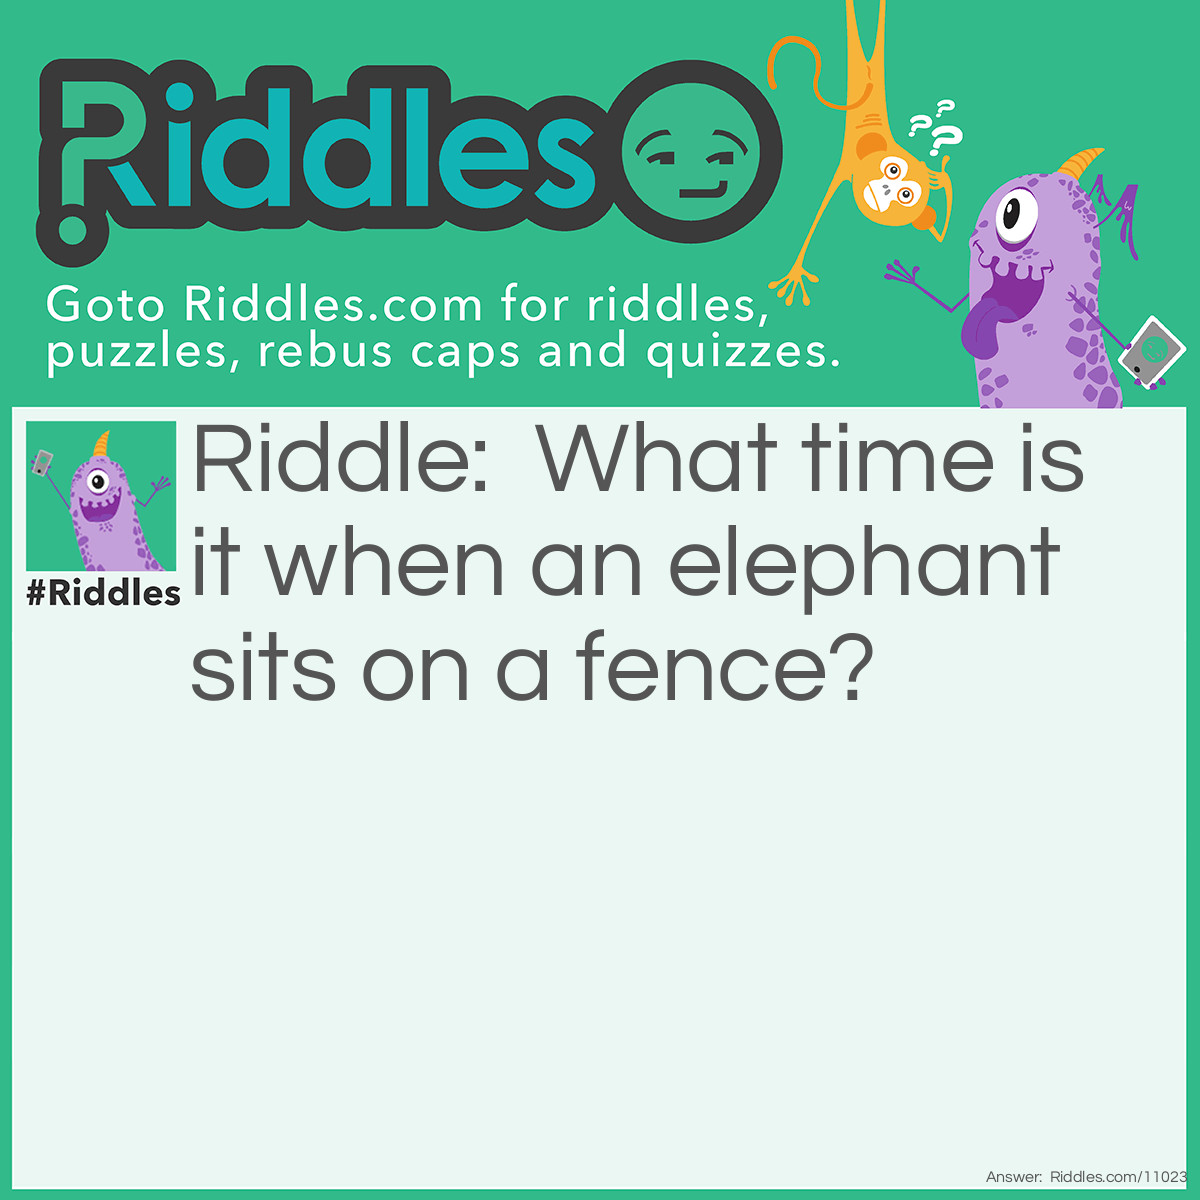 Riddle: What time is it when an elephant sits on a fence? Answer: Time to fix the fence.